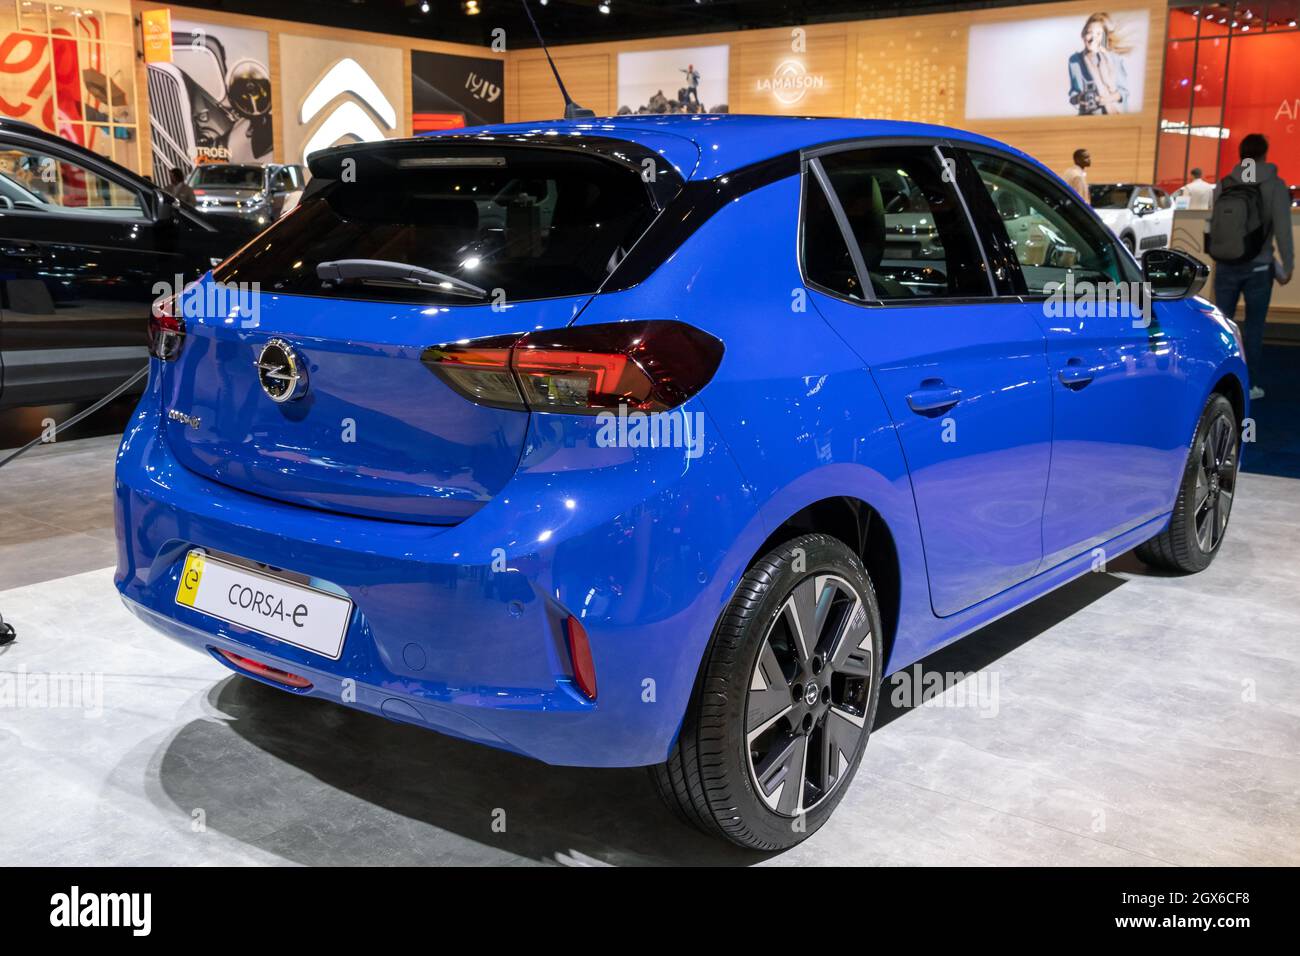 Opel Corsa-e new electric car model shown at the Autosalon 2020 Motor Show. Brussels, Belgium - January 9, 2020. Stock Photo